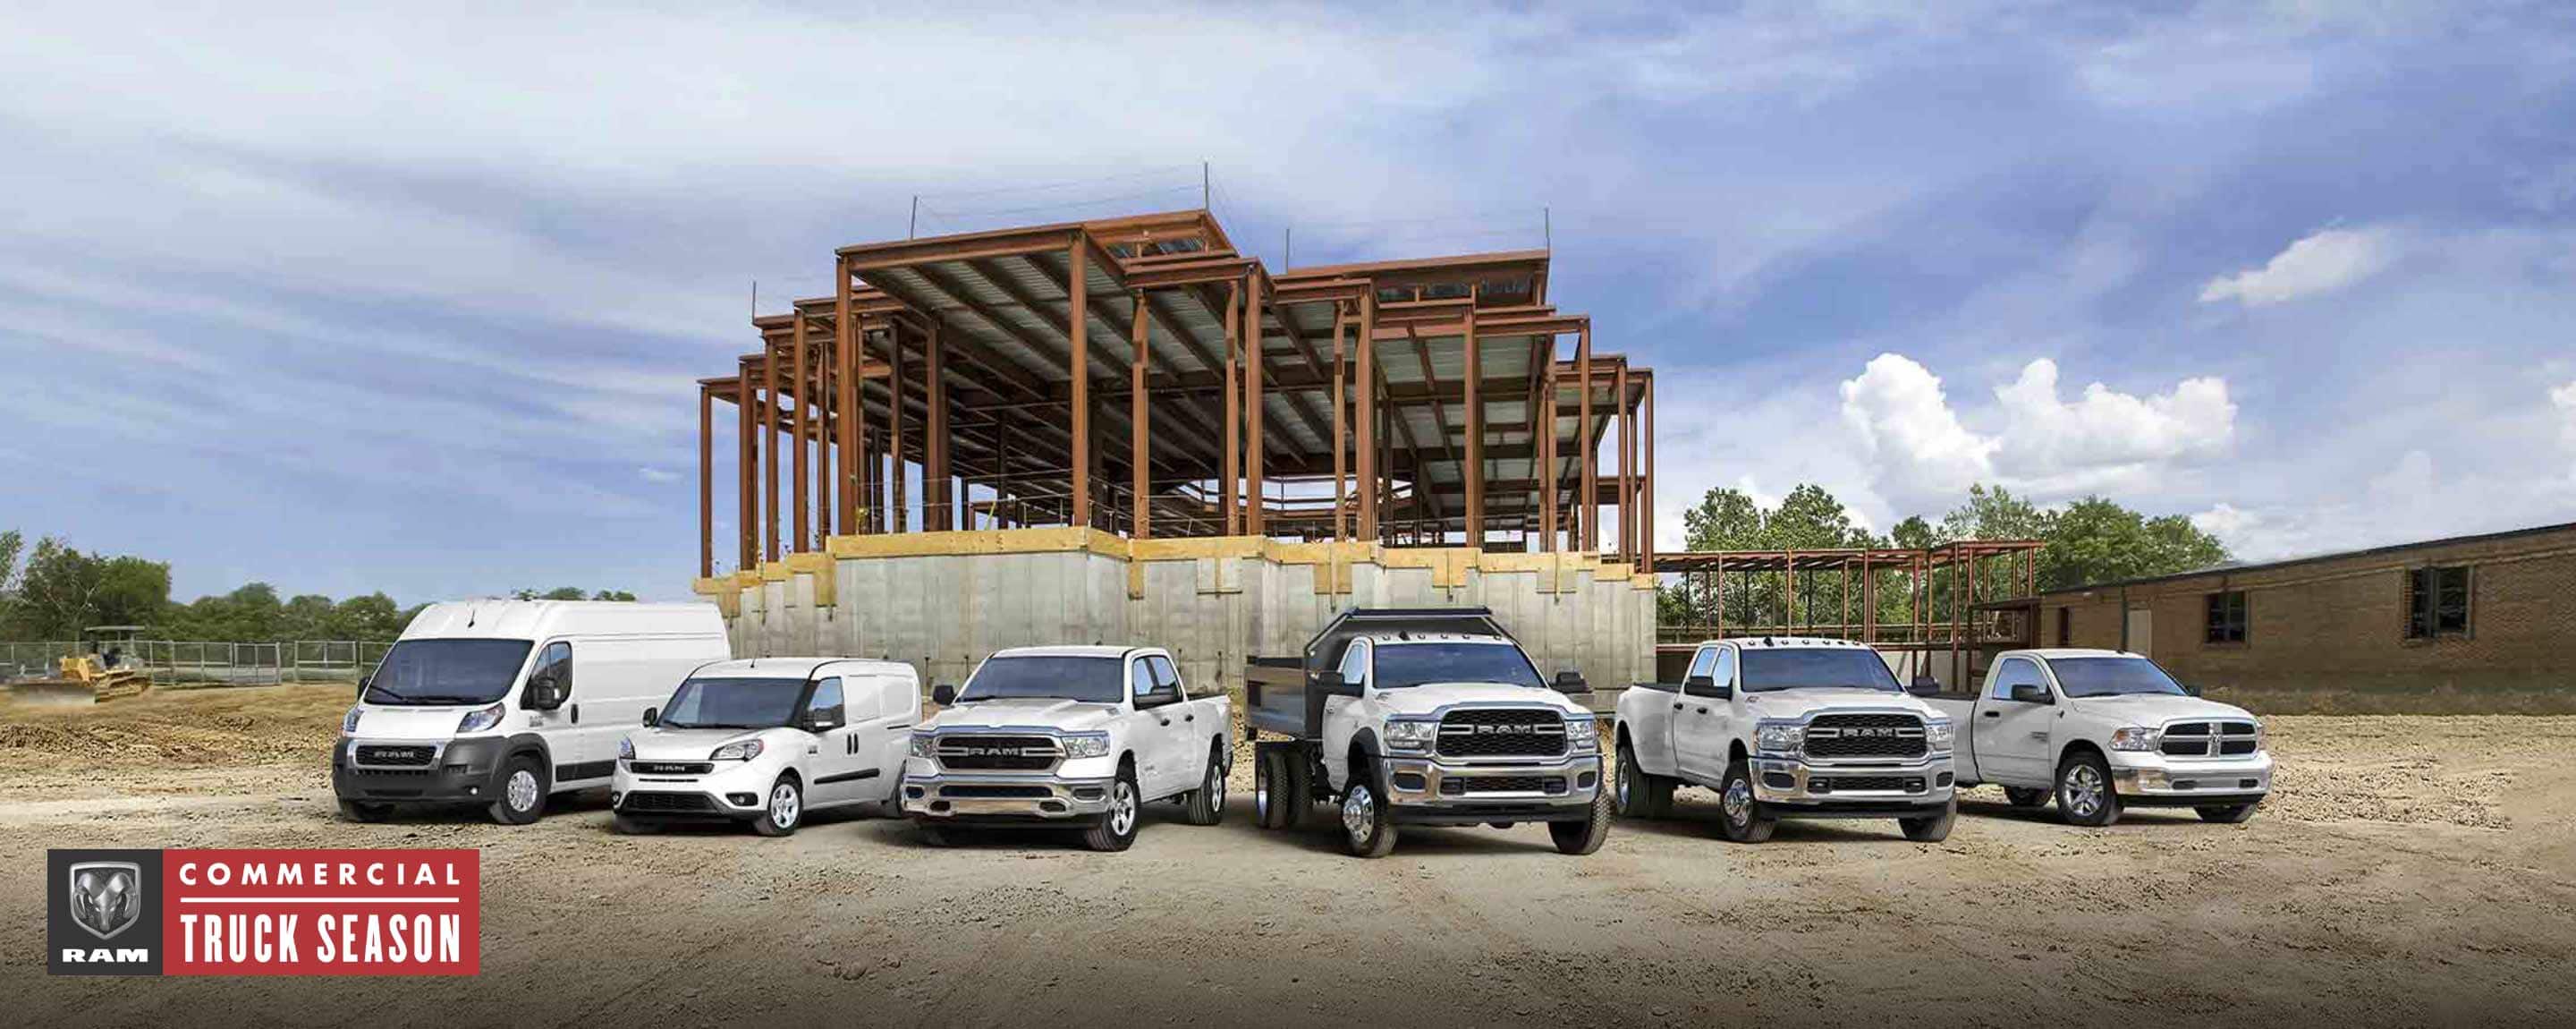 Ram Commercial Truck season. A line-up of six Ram trucks and vans on a commercial site.